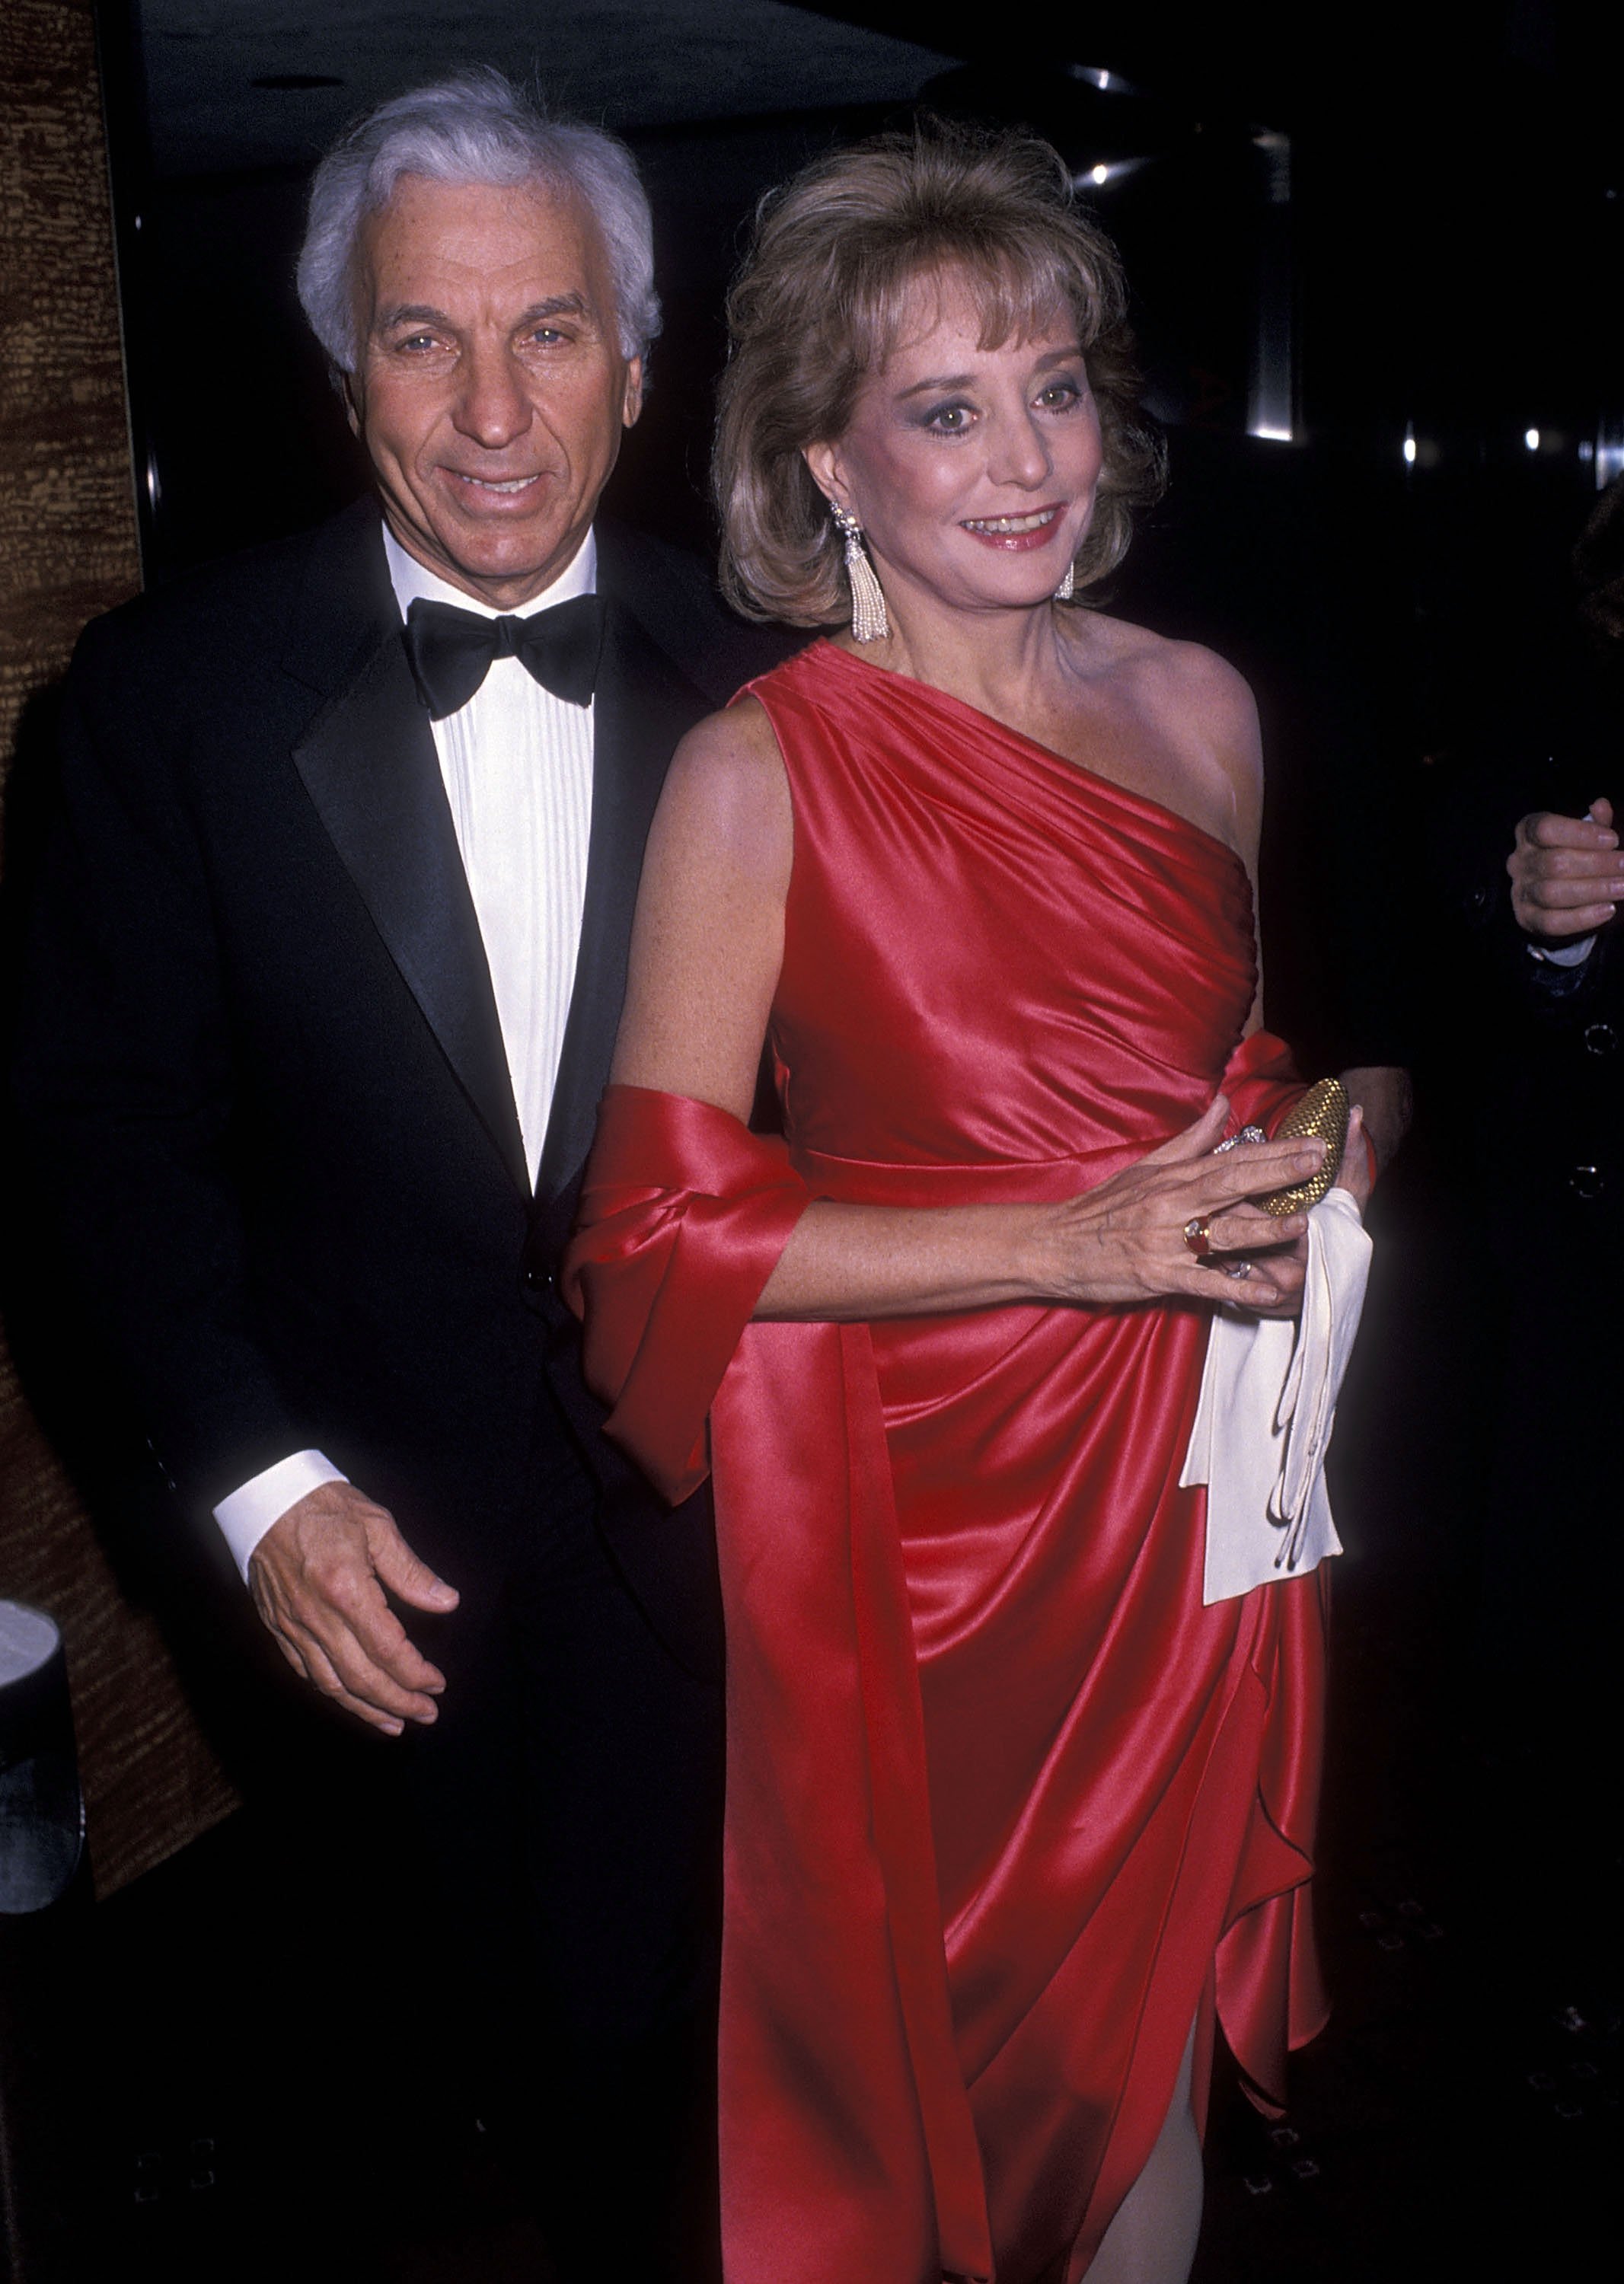 Barbara Walters and Merv Adelson attend the American Museum of the Moving Image Honors Sidney Poitier on February 28, 1989 at the Waldorf-Astoria Hotel in New York City | Photo: Getty Images